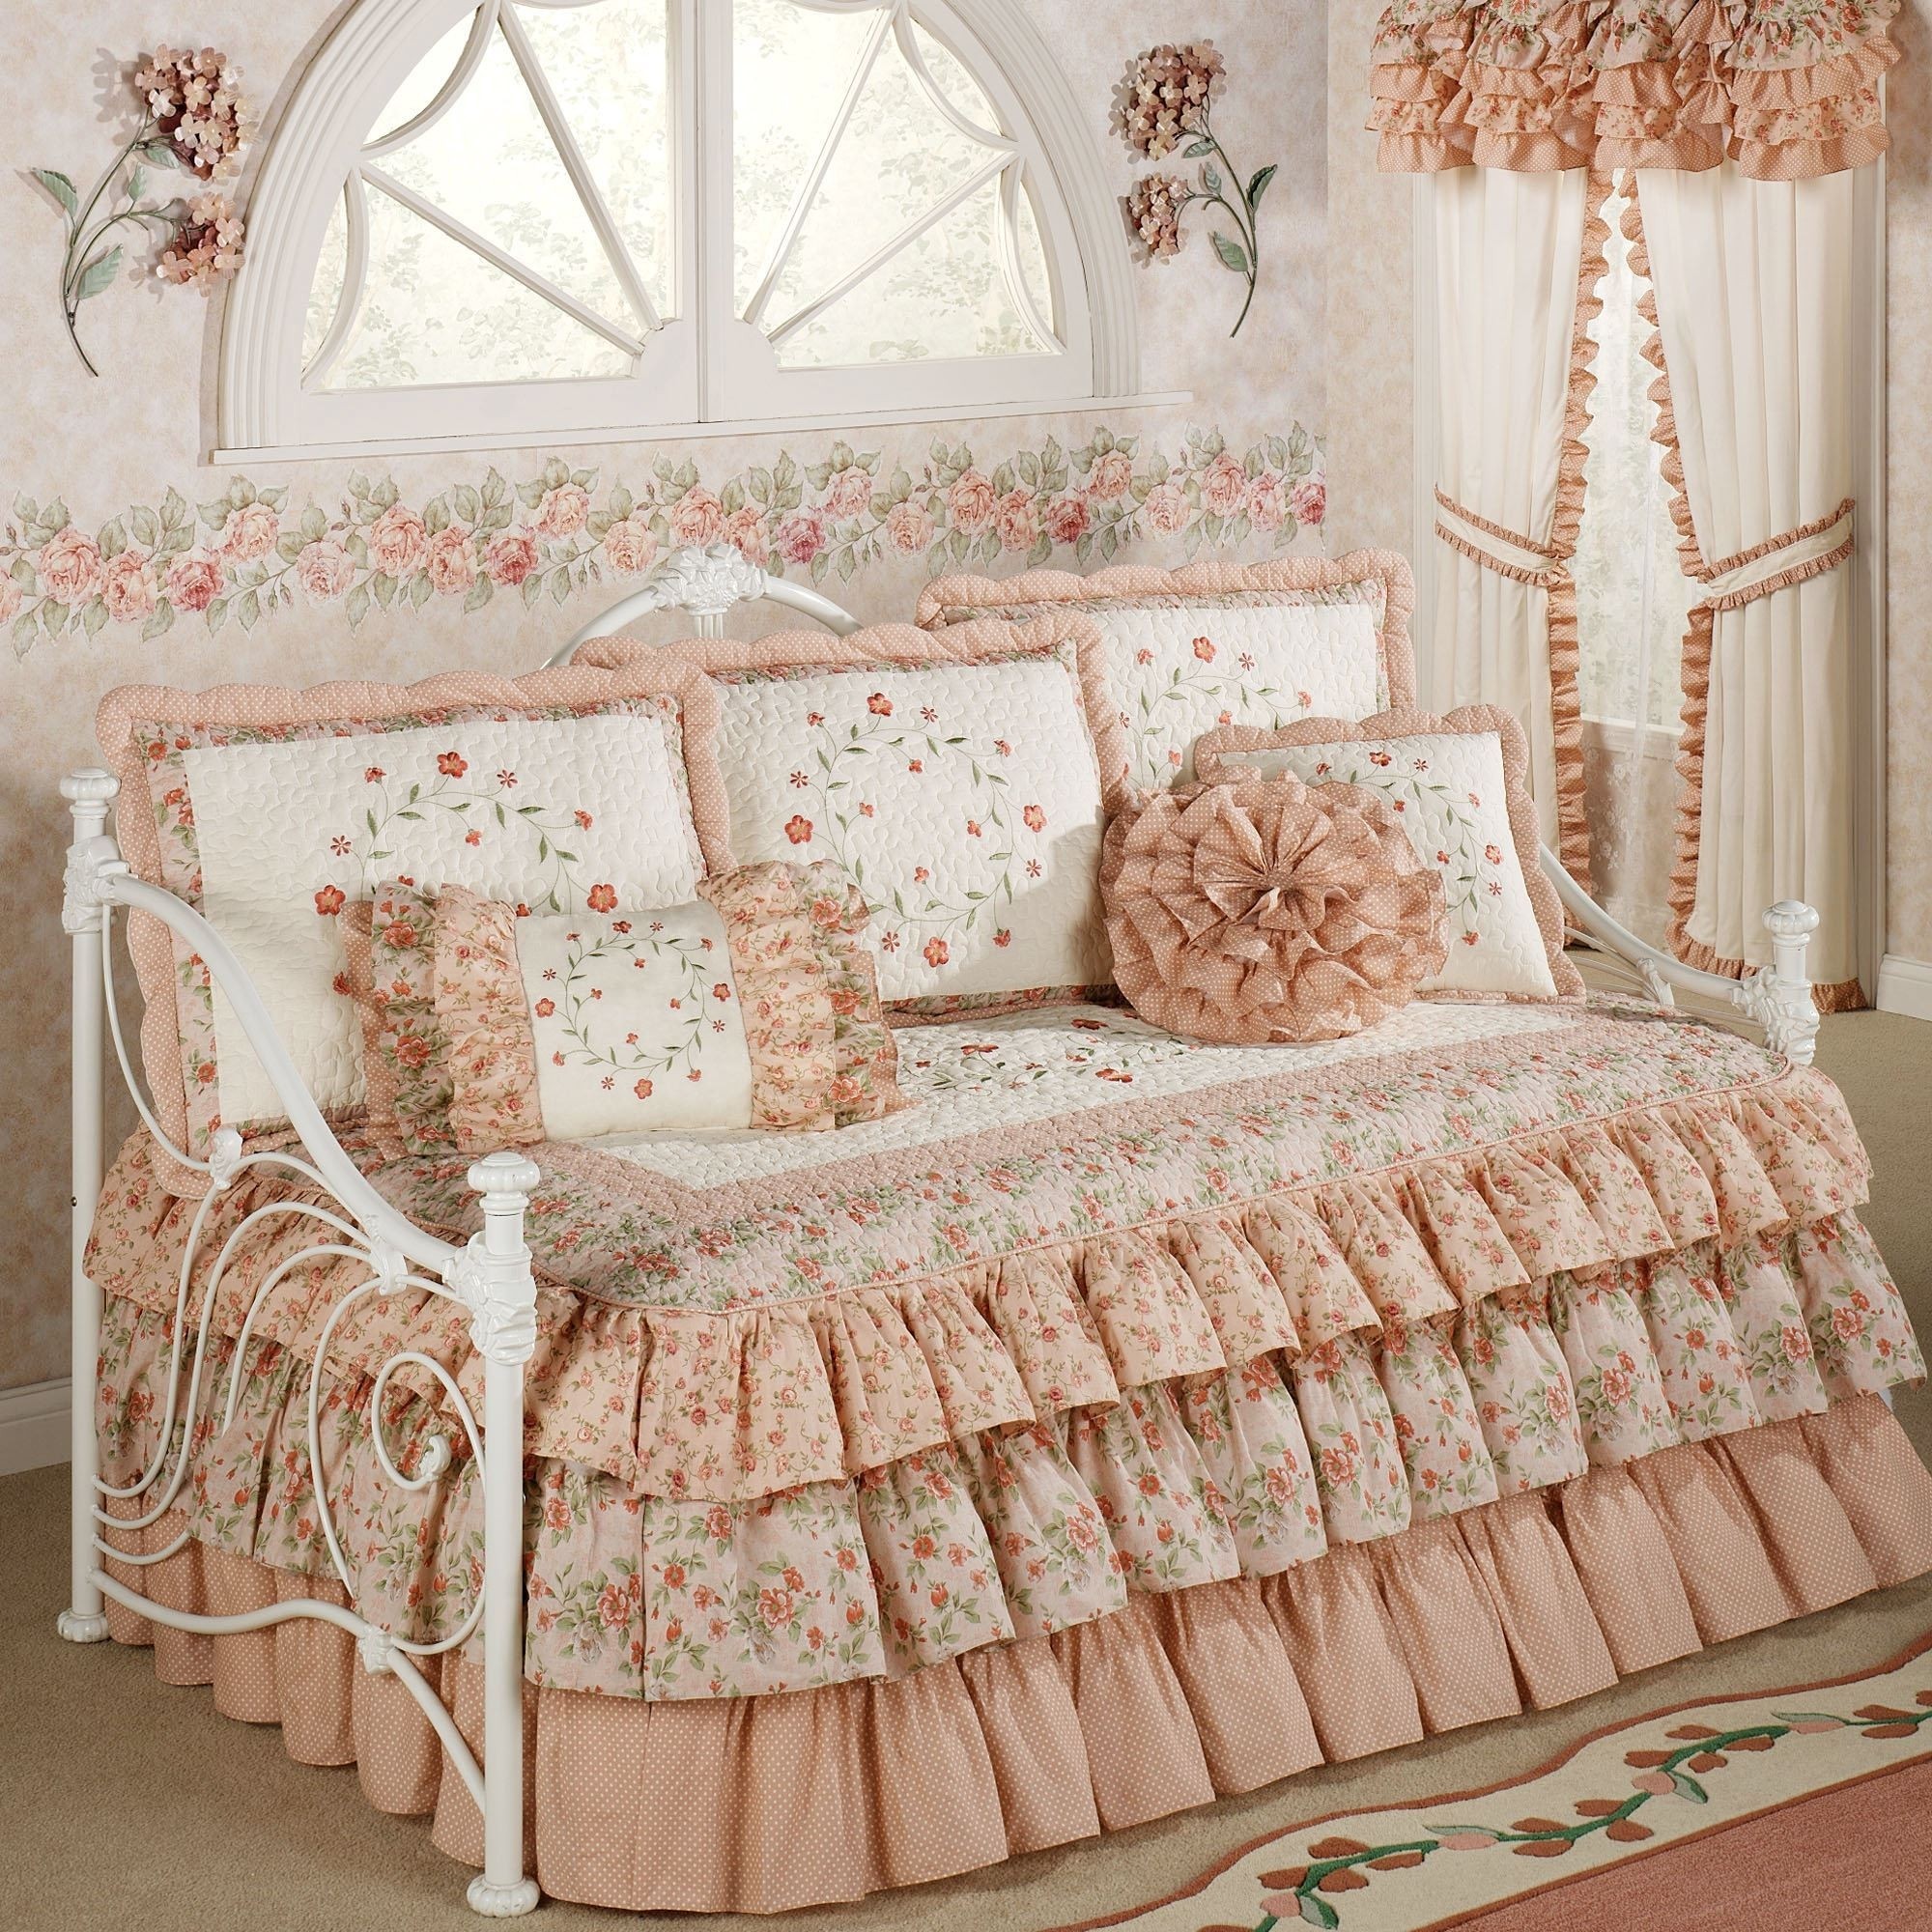 Daybed bedding sets clearance 20 attributions to the 9